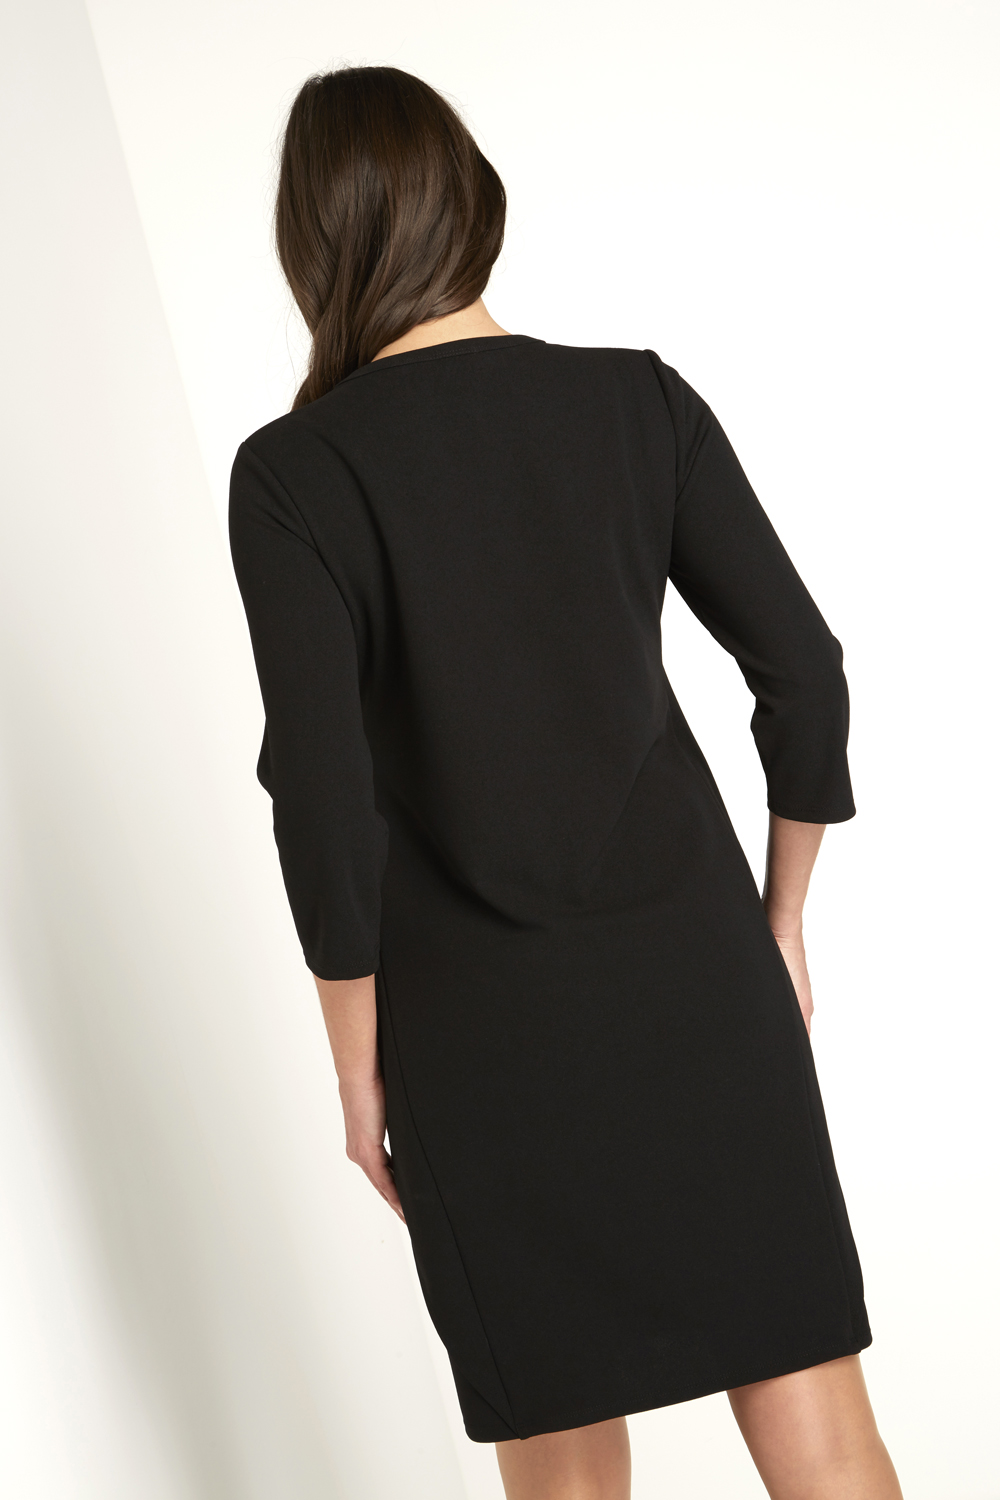 Black Double Layer T-Shirt Dress, Image 3 of 4